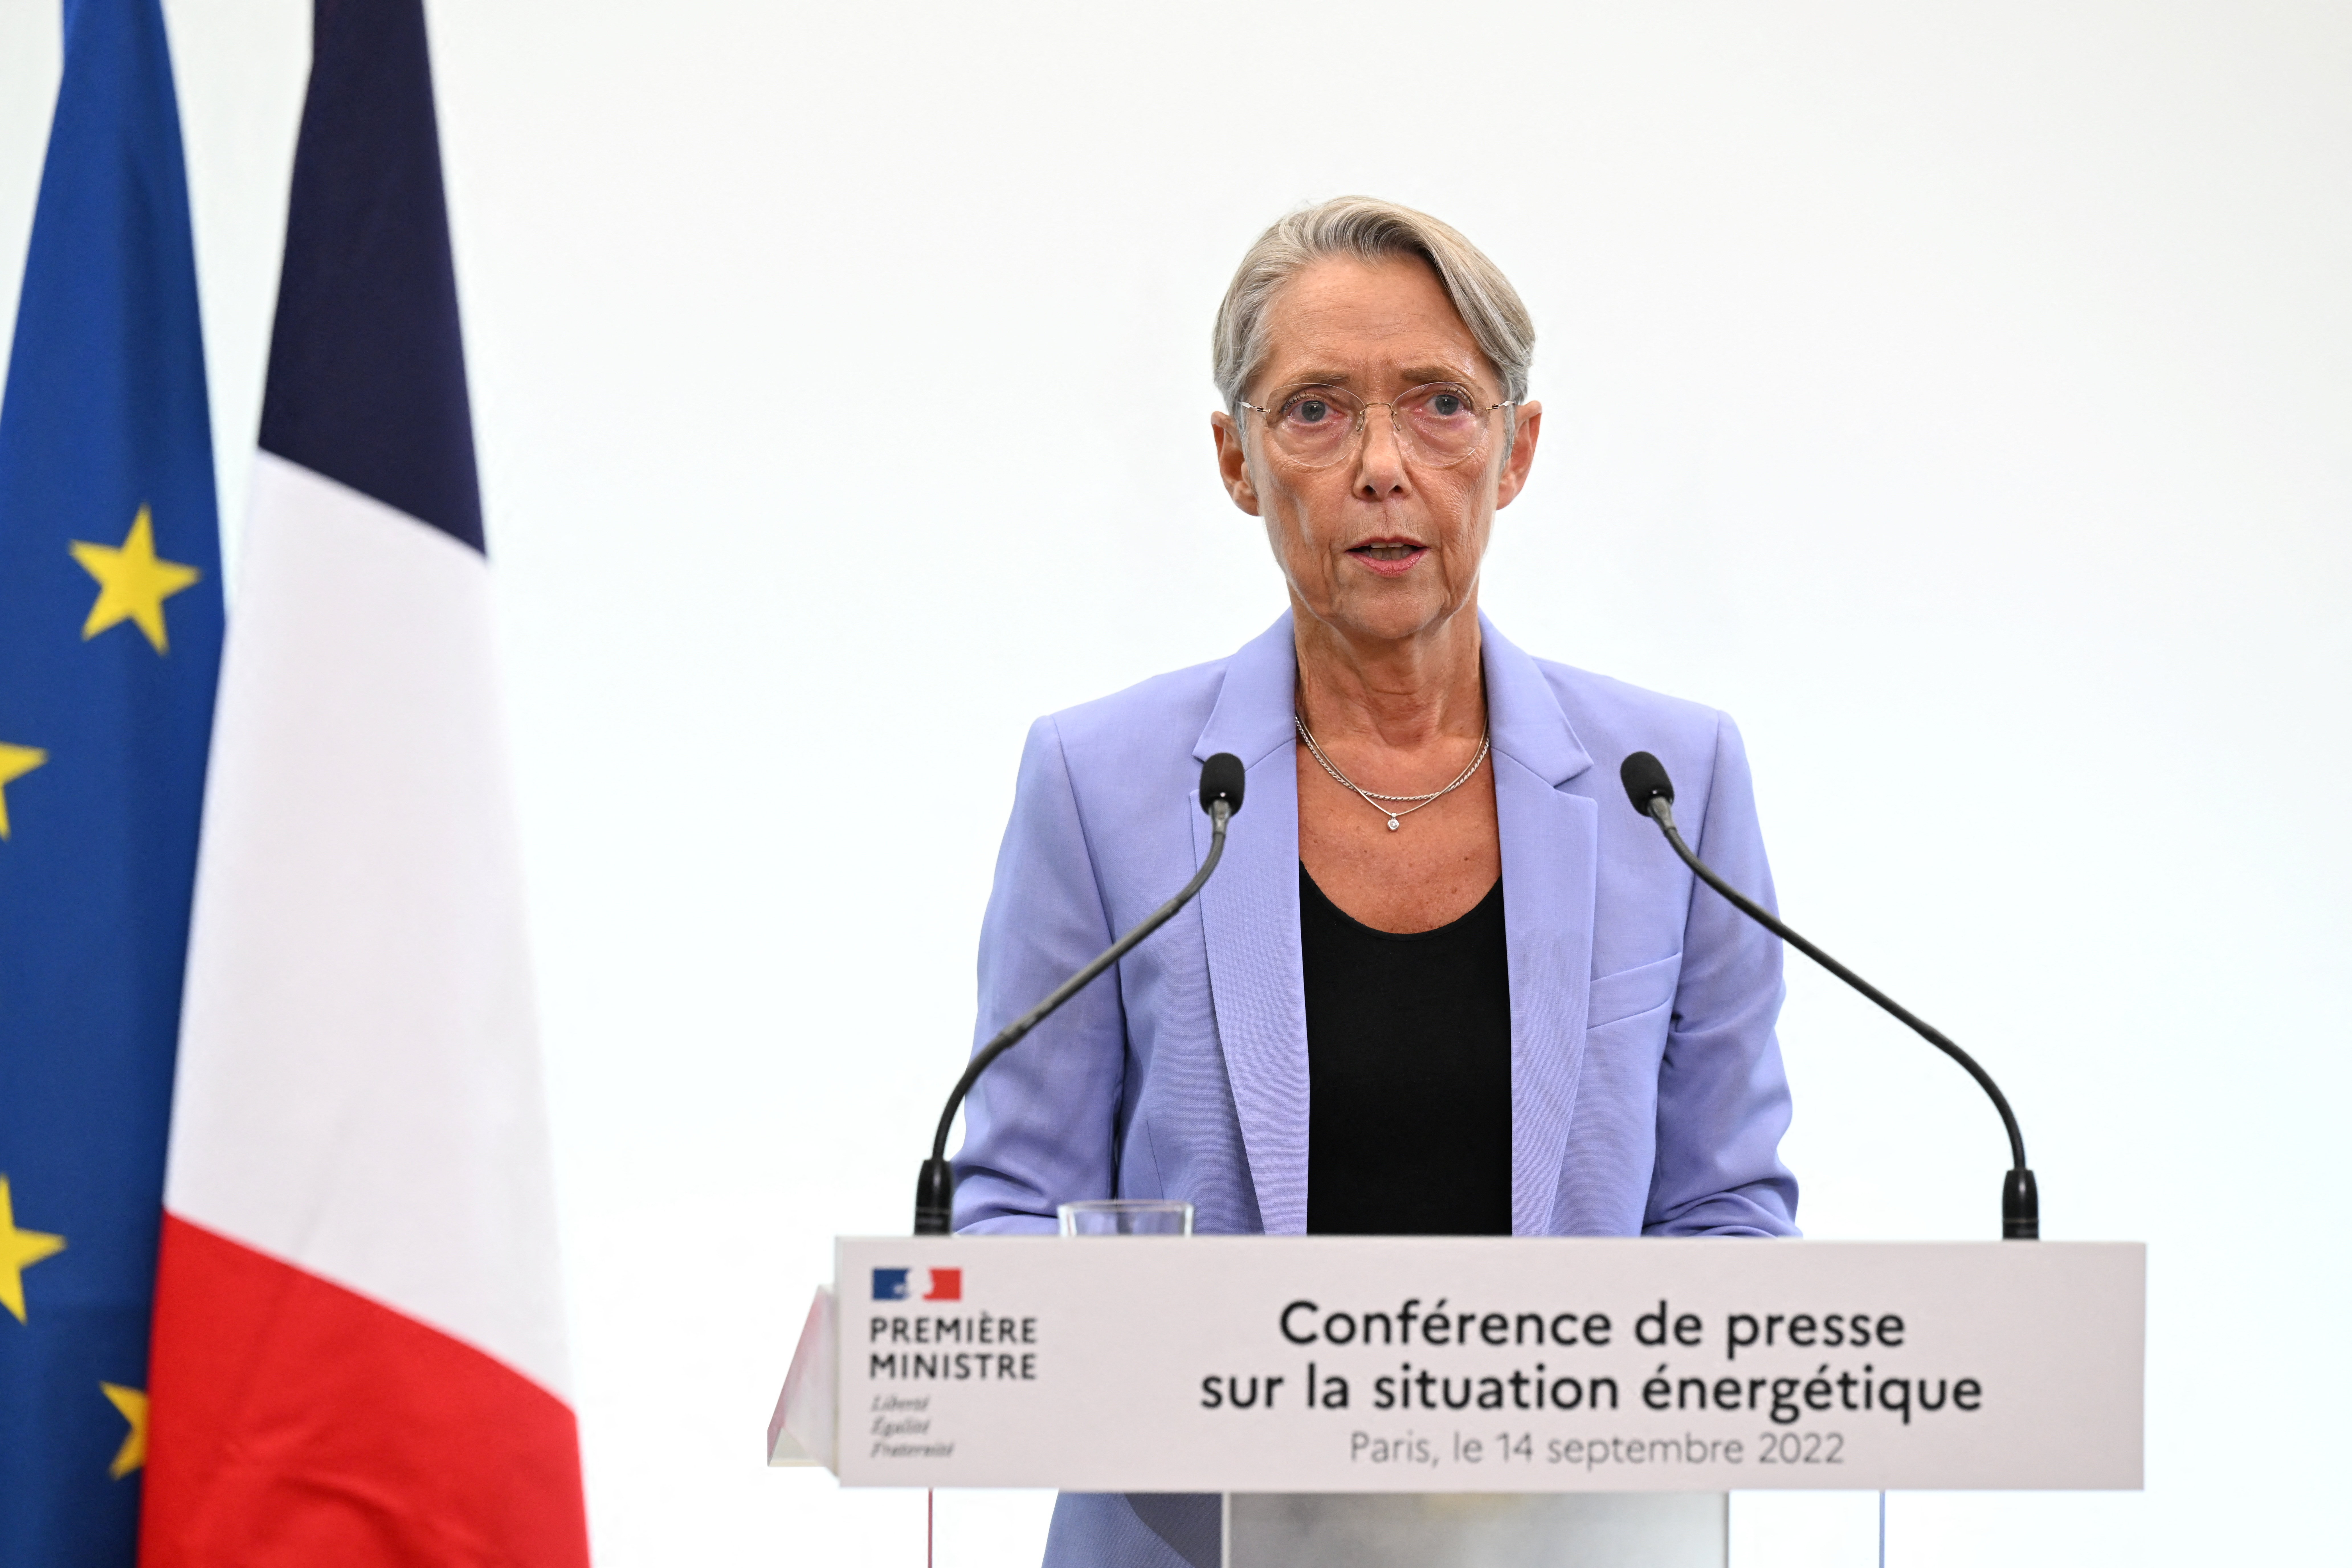 French Prime Minister Elisabeth Borne delivers a speech during a press conference on the energy situation in France and Europe, in Paris